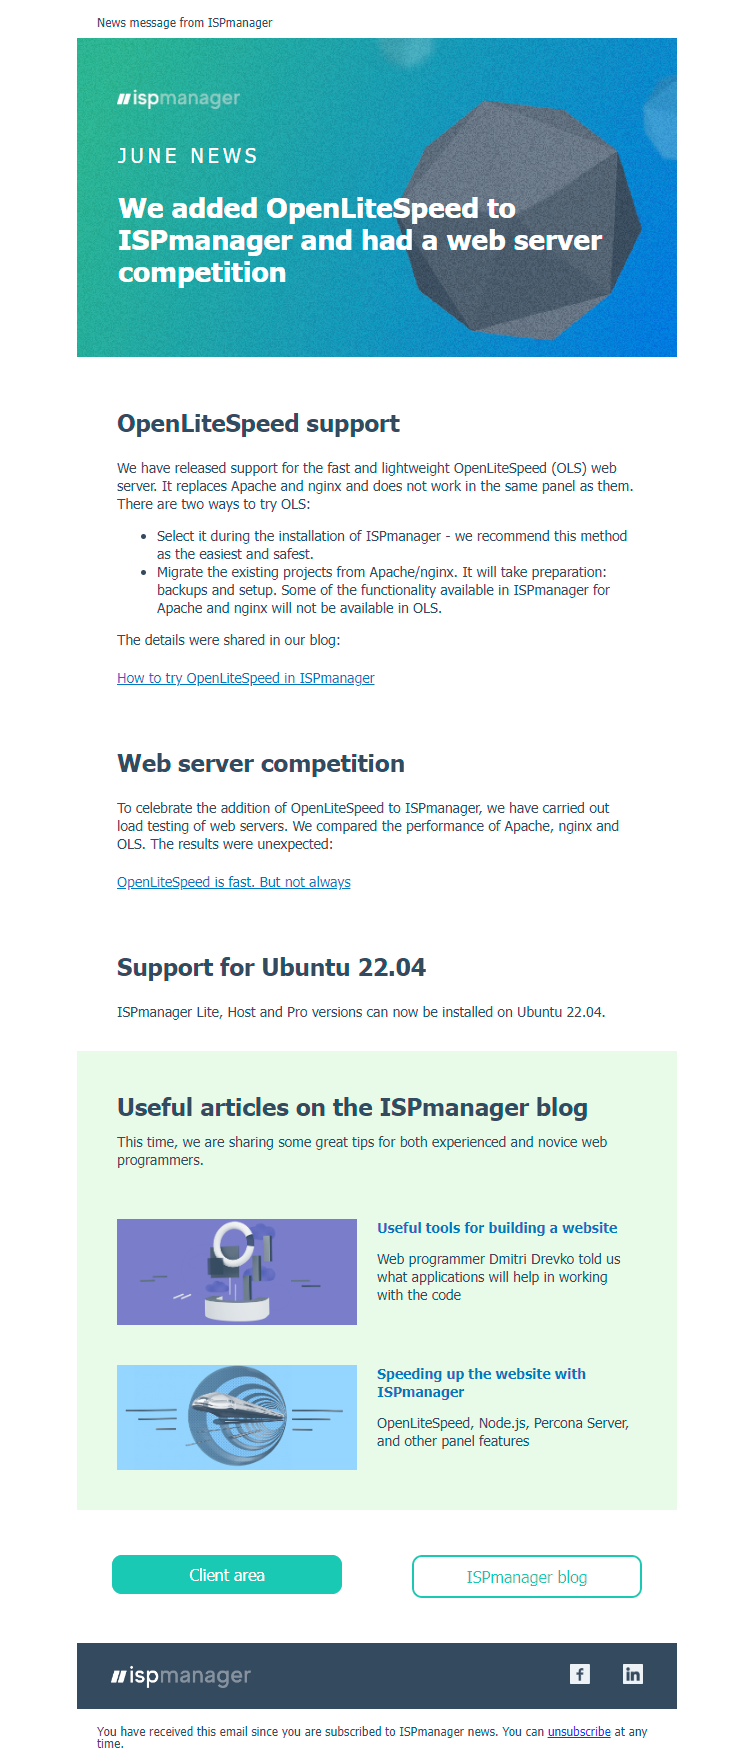 We added OpenLiteSpeed to ISPmanager and had a web server competition